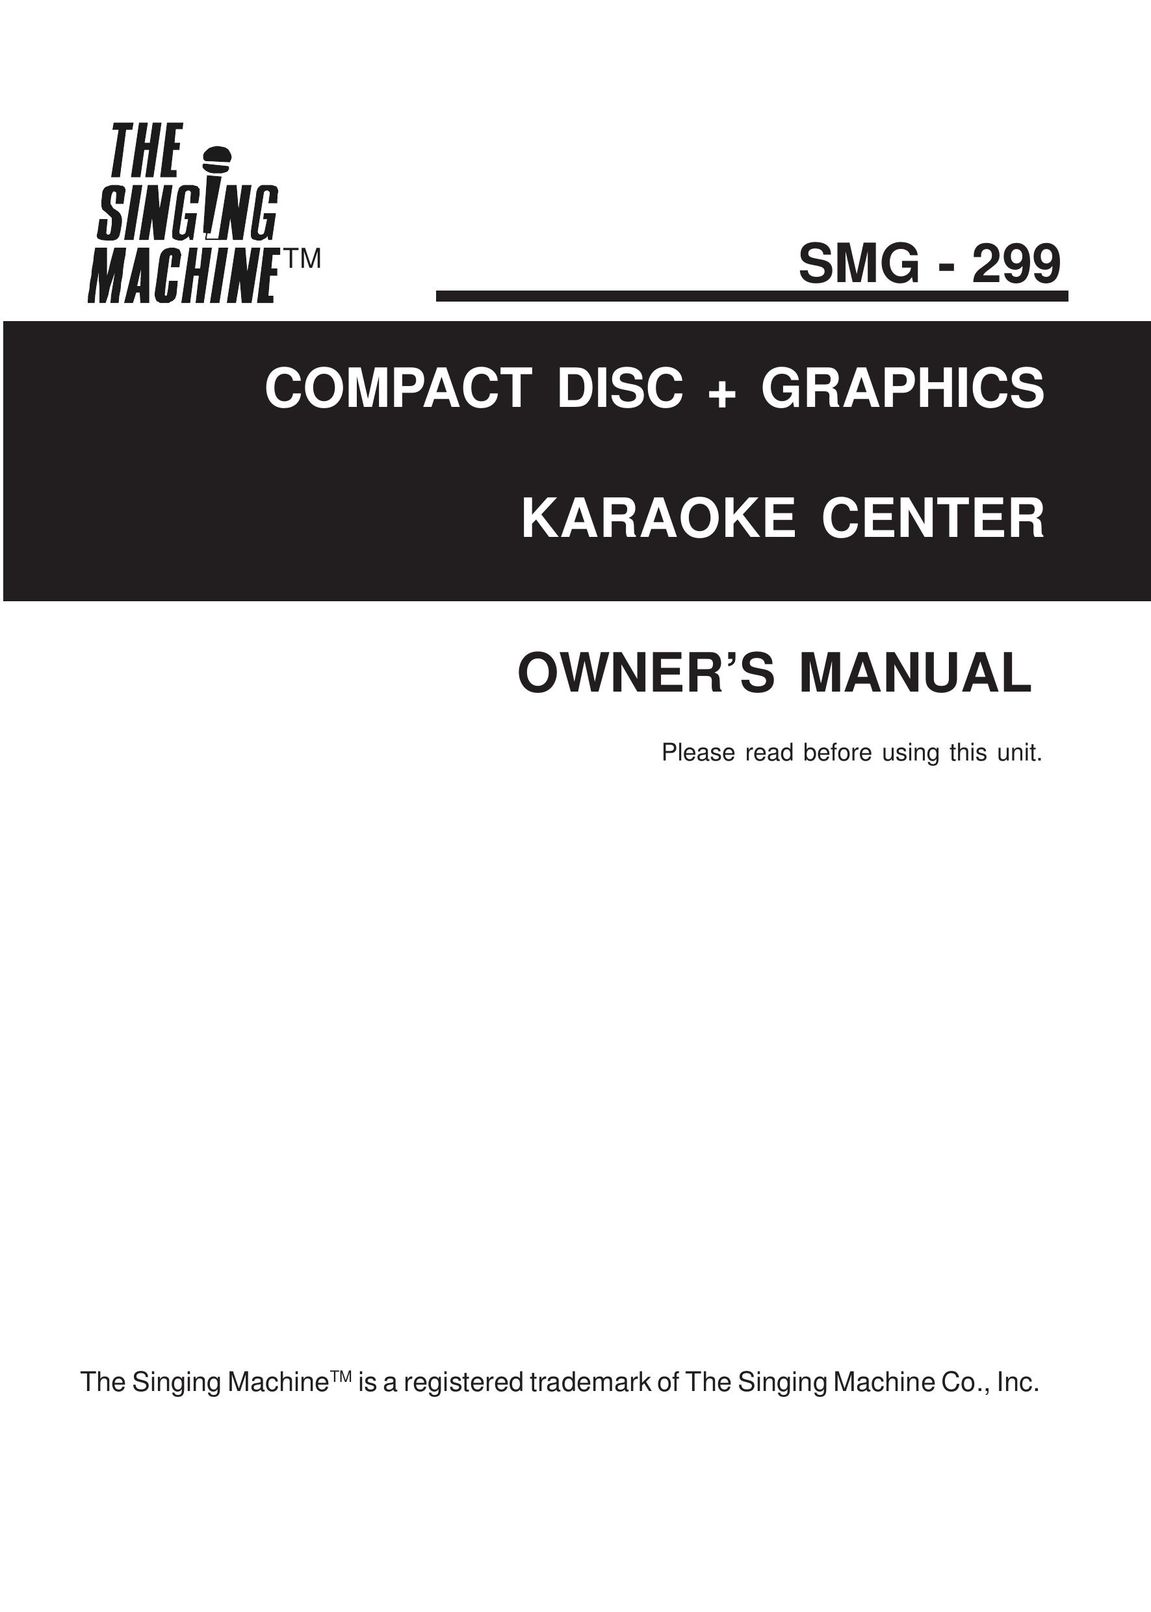 The Singing Machine SMG - 299 CD Player User Manual